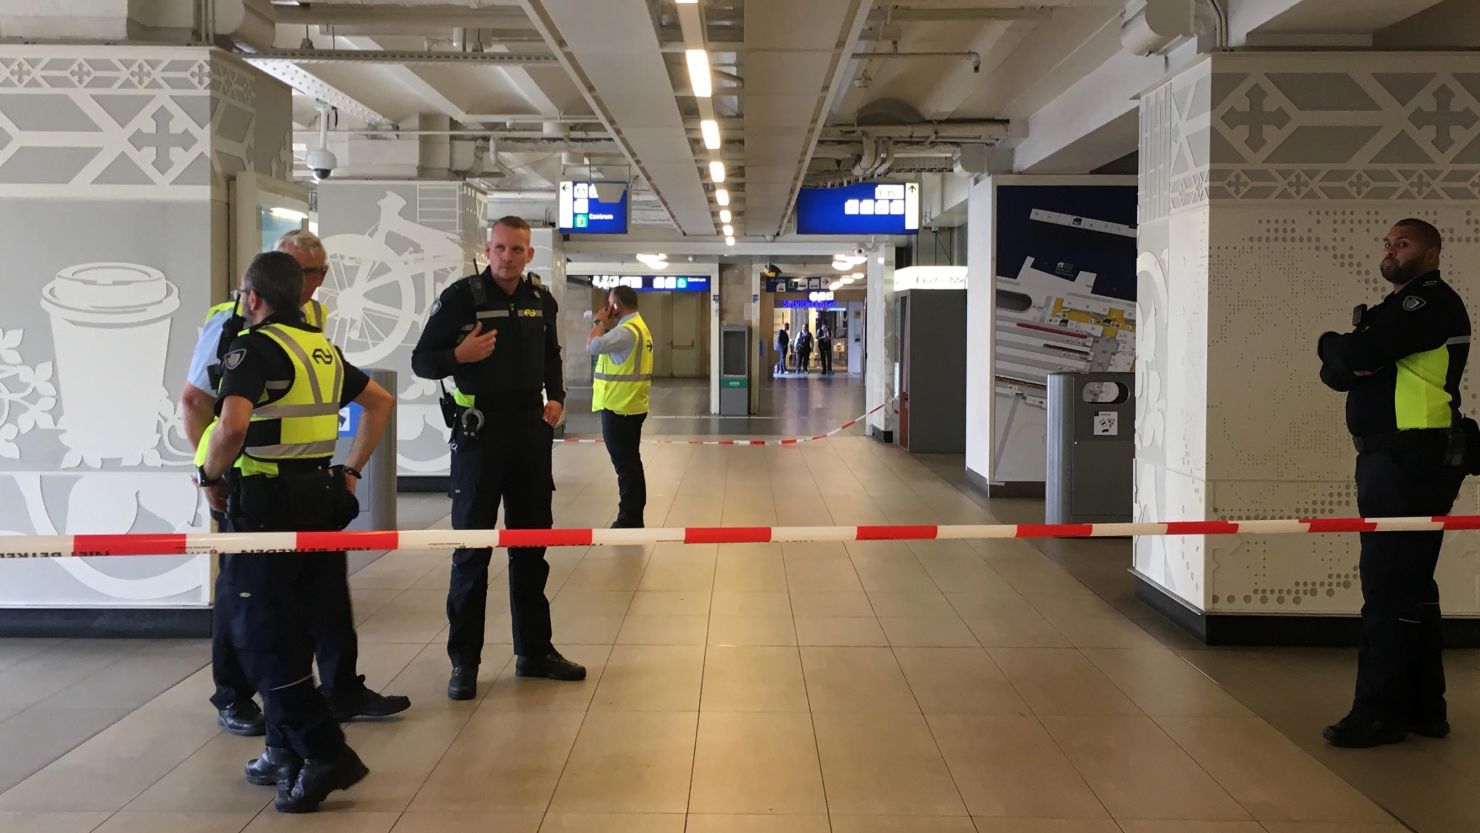 Security officials cordon off an area inside the central railway station in Amsterdam.